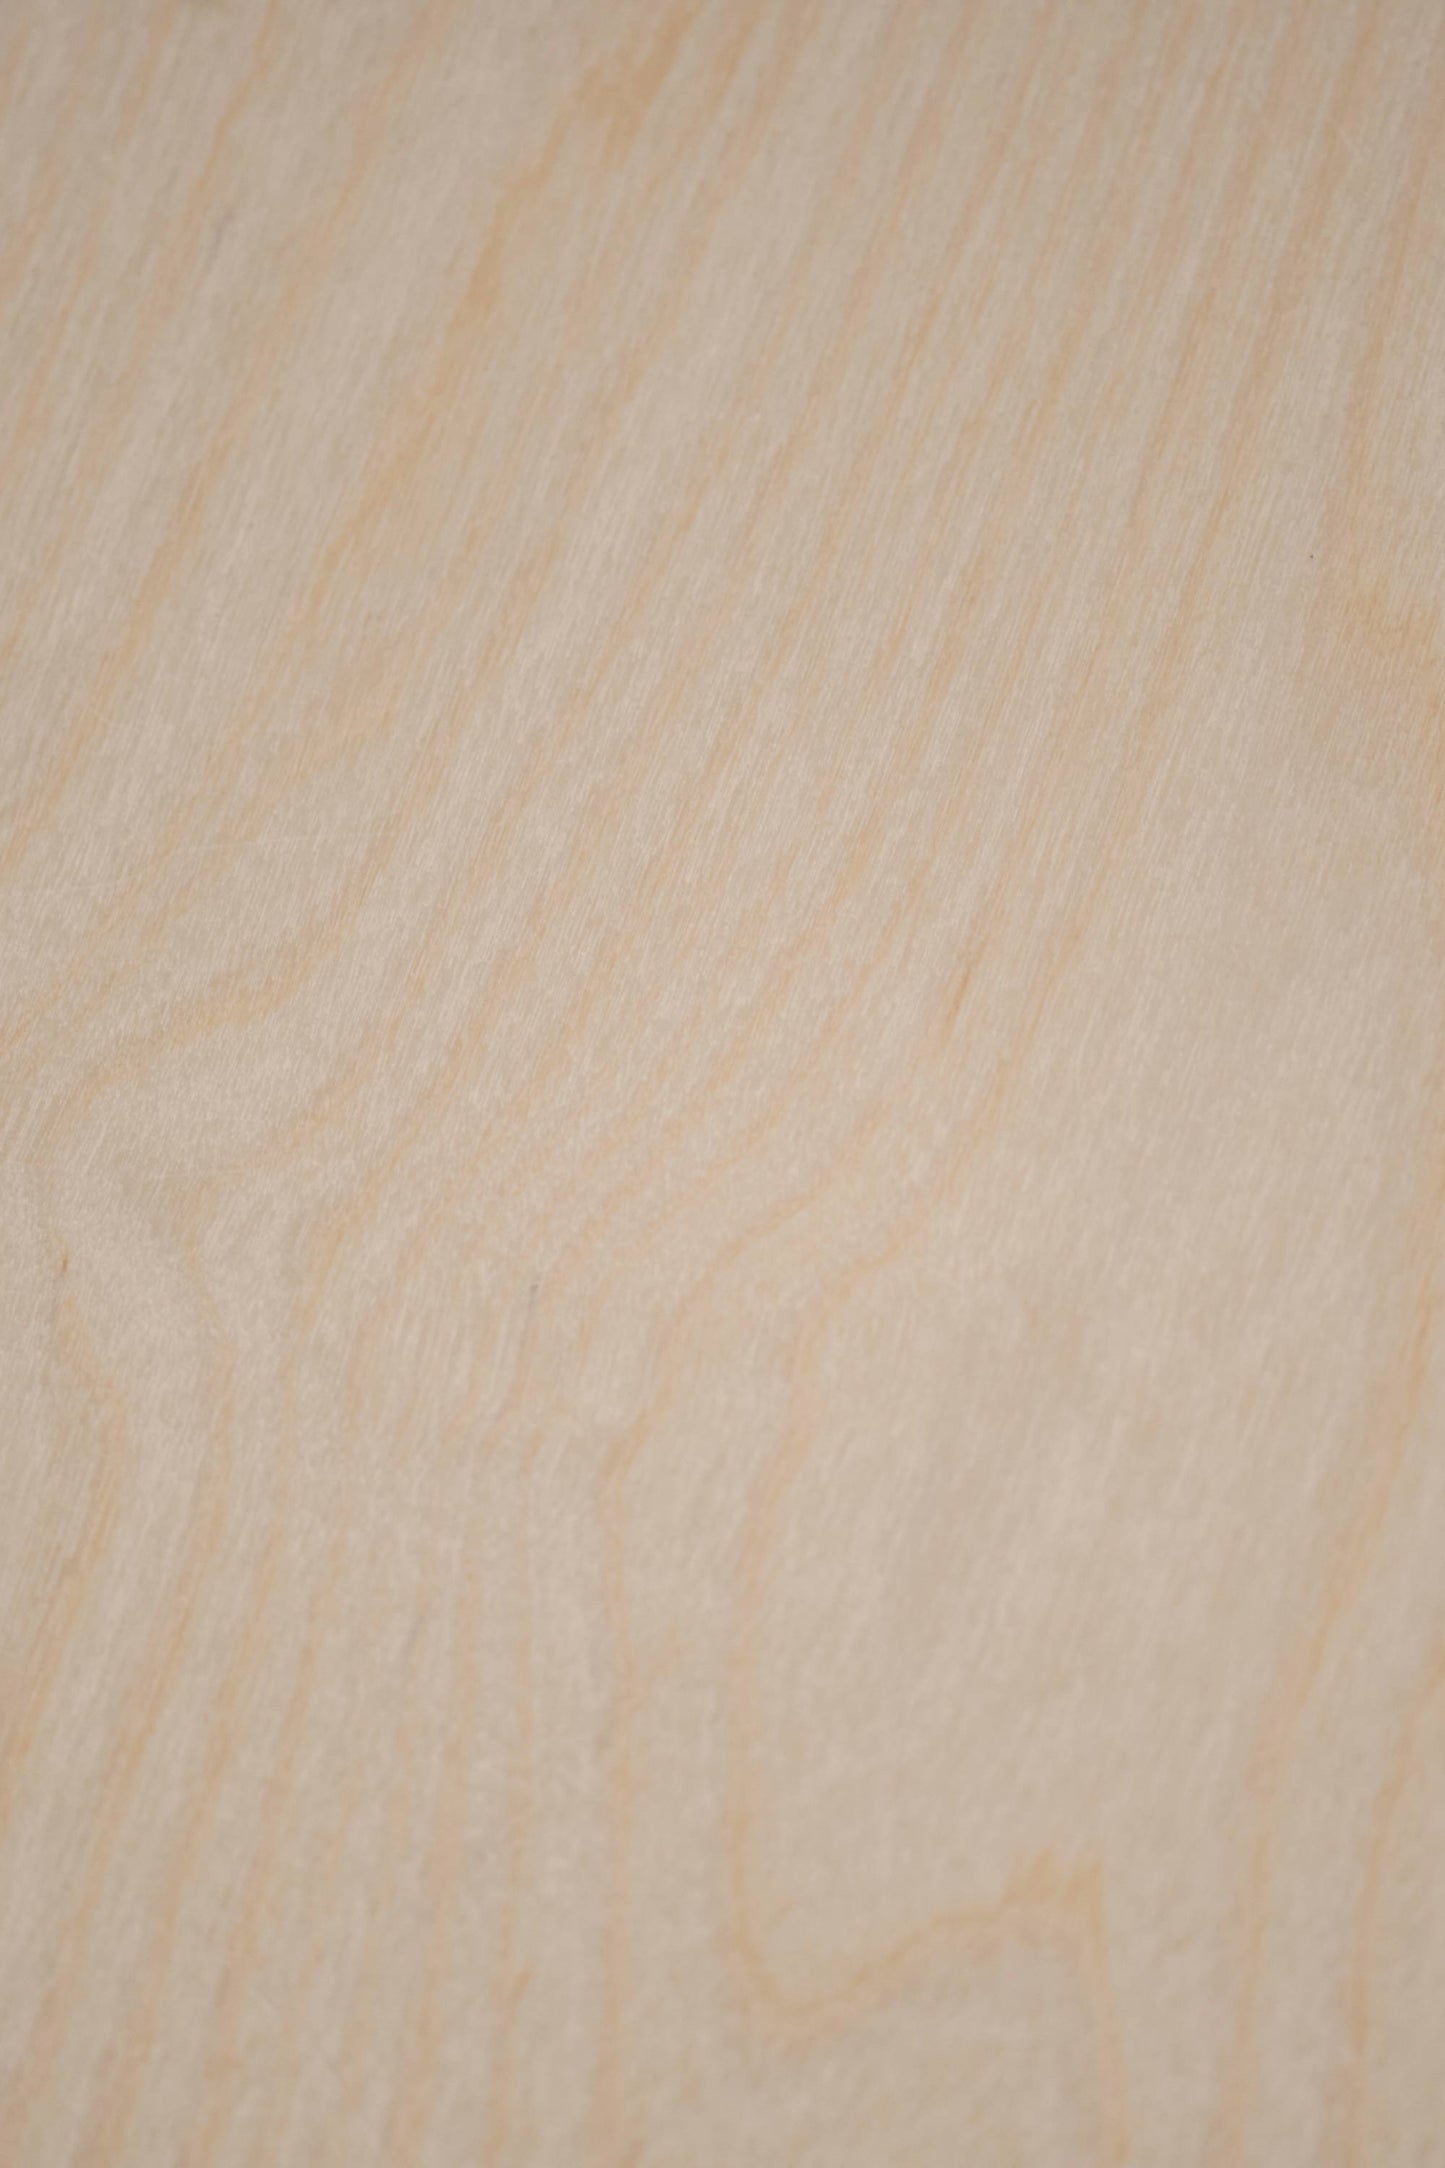 Close-up of the untreated birch multiplex plywood used in the Sputnik Table.